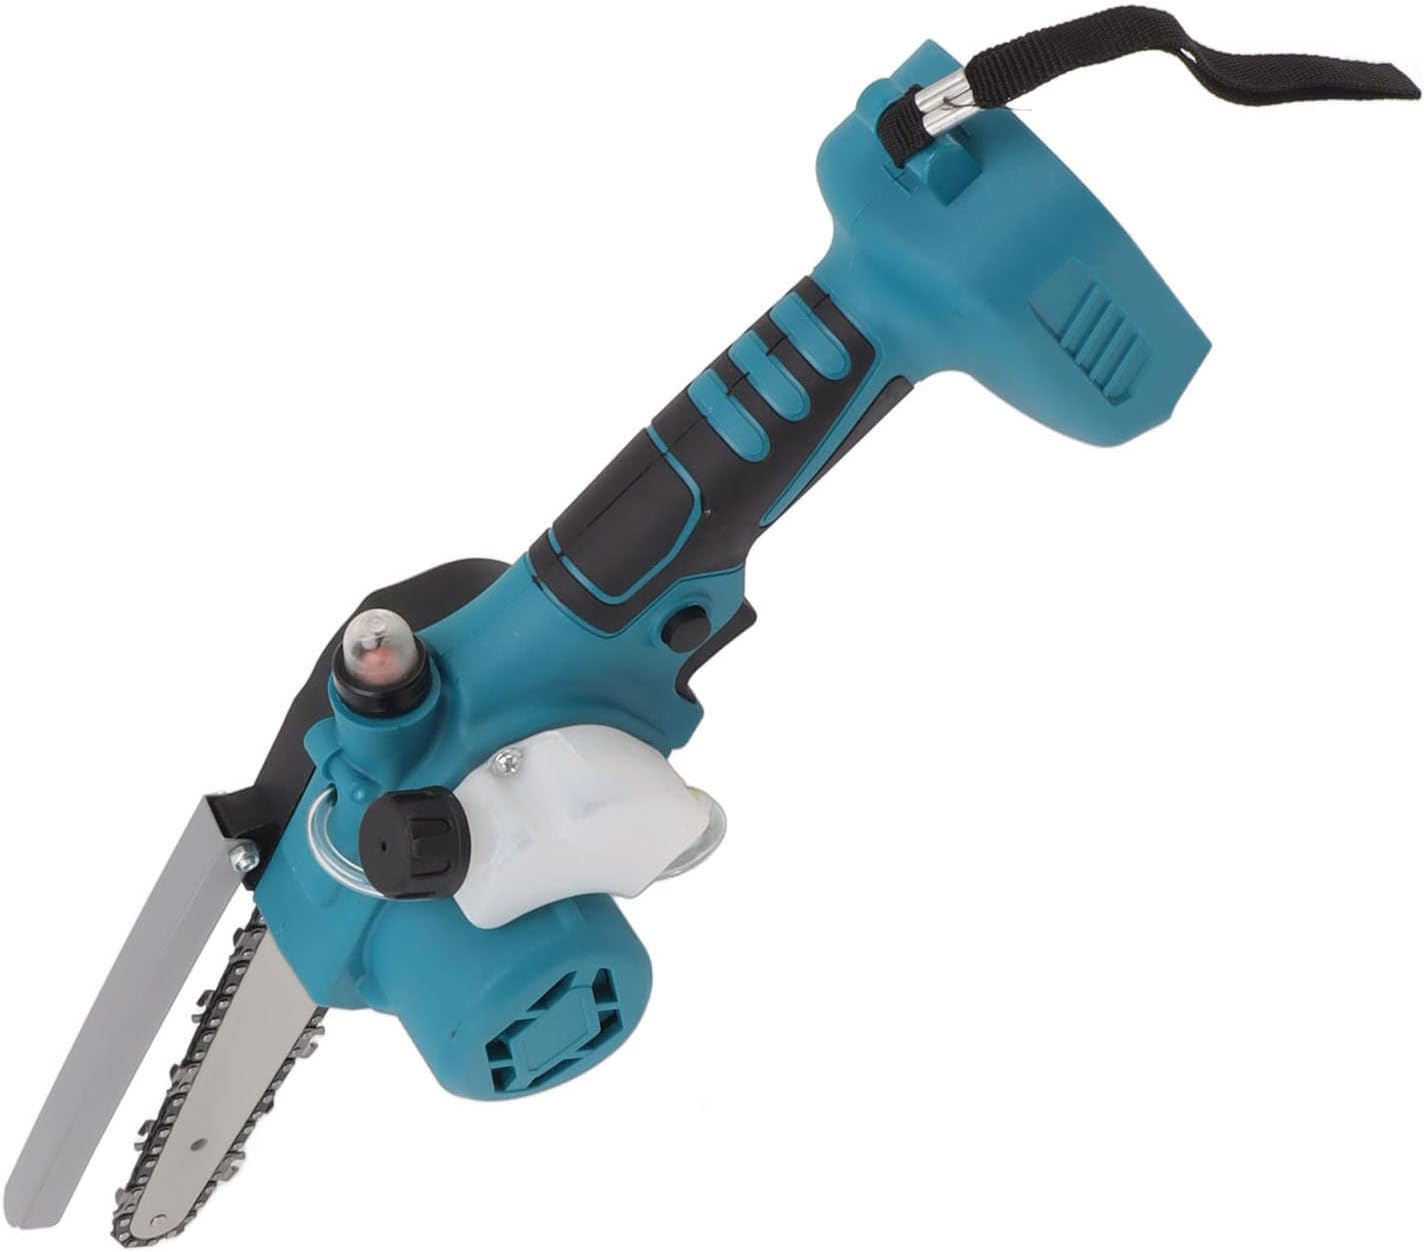 Cordless Electric Saw Chainsaw, 6 Inches, 18V Battery, Blue